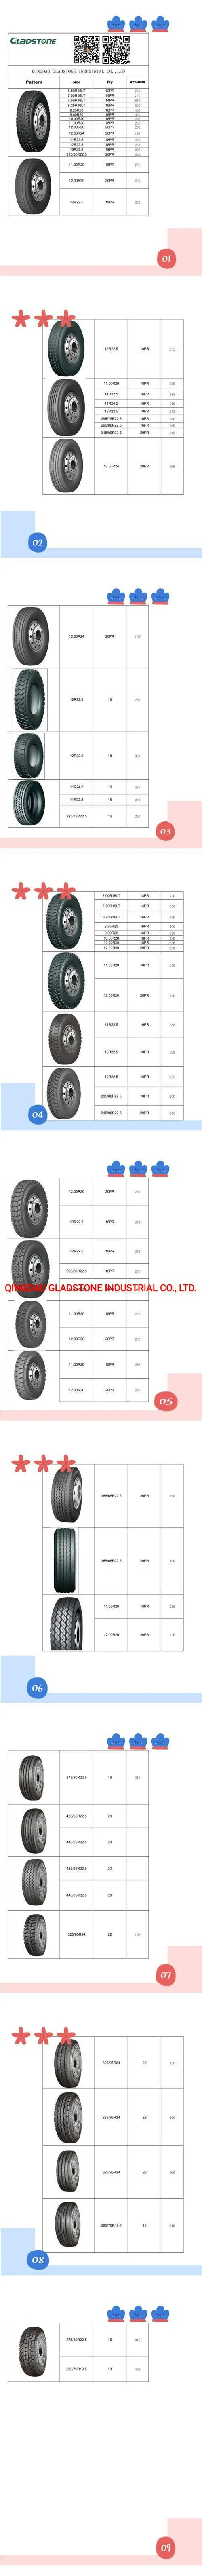 Gladstone Brand 315/80r22.5 New Pattern Hot Sale in Nigeria Can Mix Load with Car Tyre, Tube, Rims, Battery